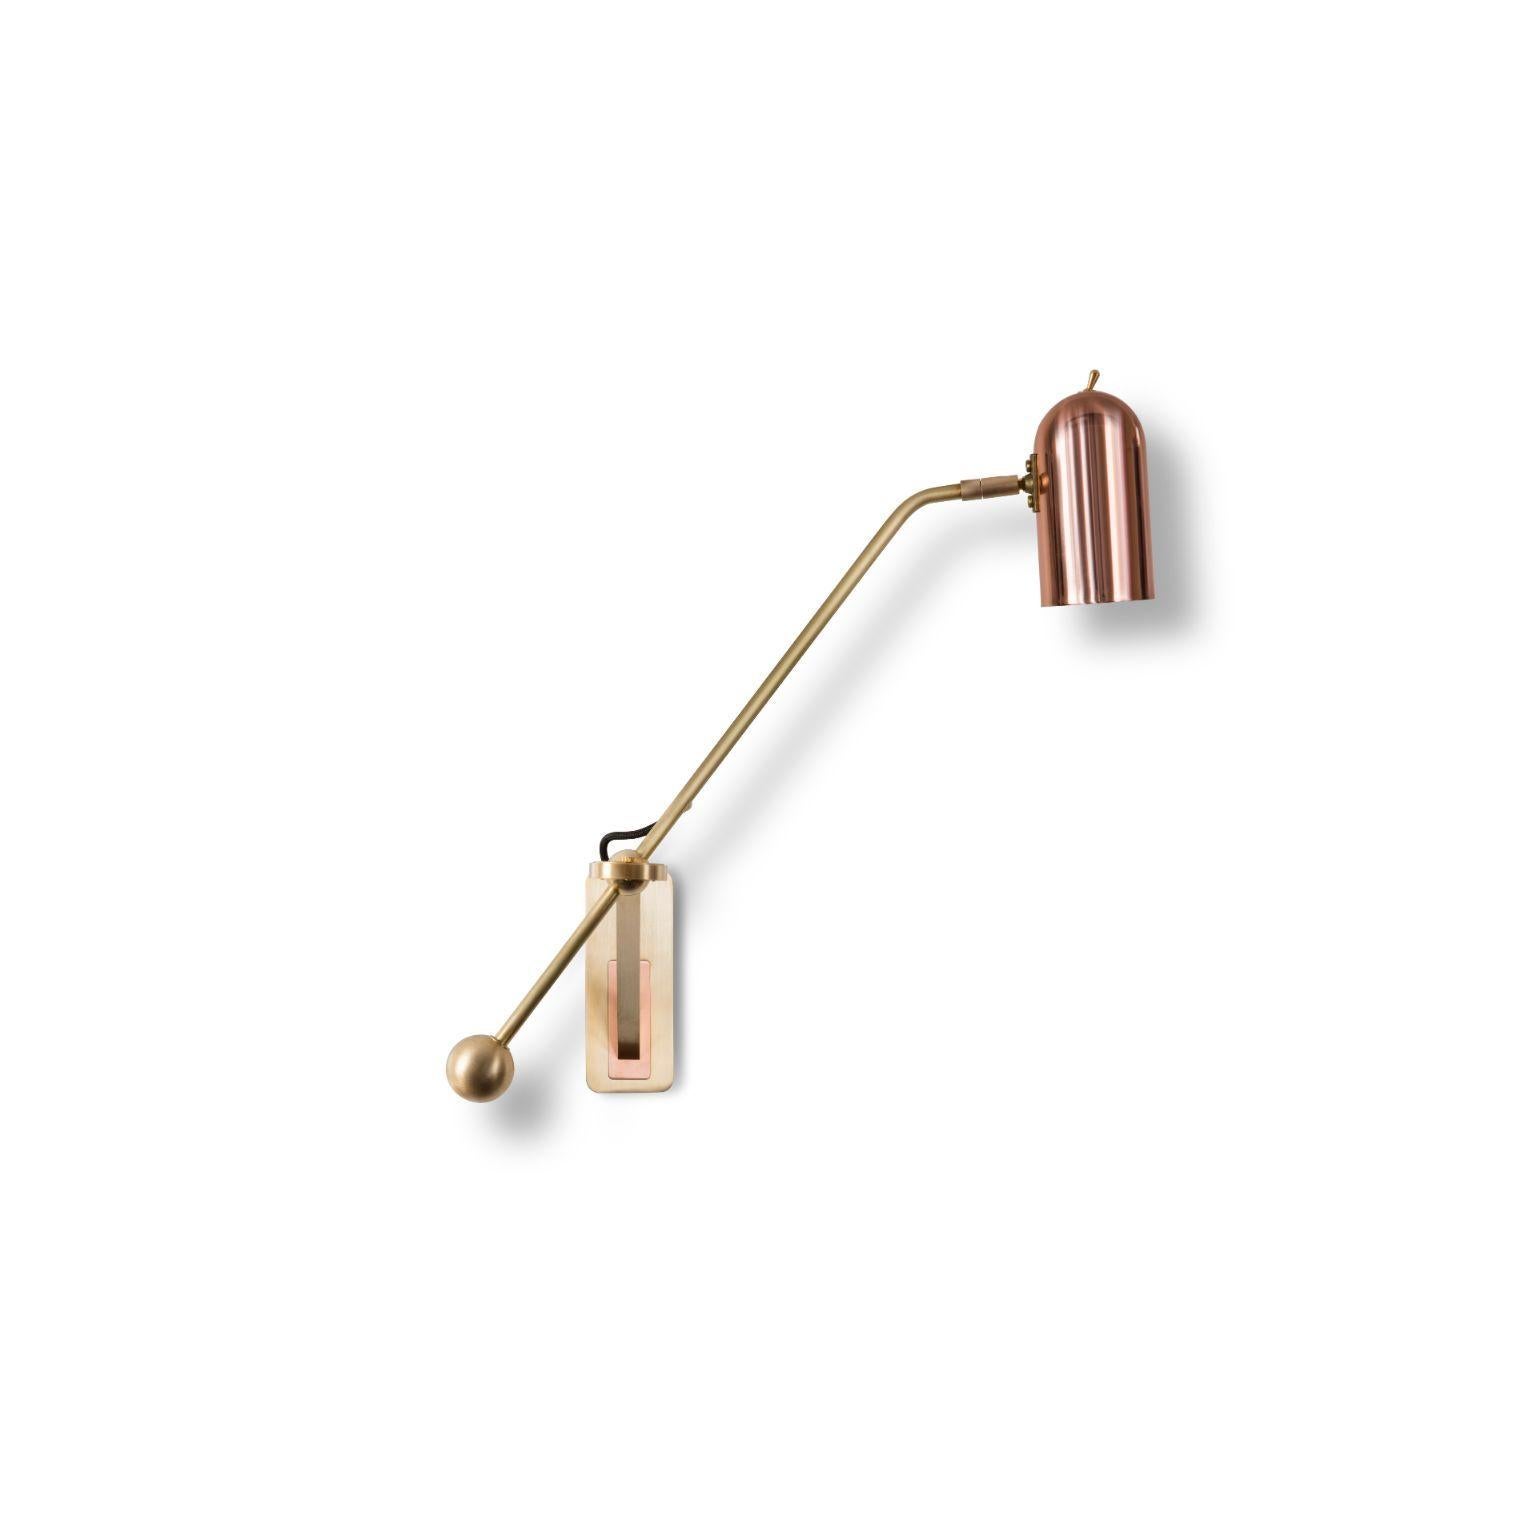 Stasis wall light, brass + polished copper by Bert Frank
Dimensions: 53 x 30 x 47 cm
Materials: Brass, copper

When Adam Yeats and Robbie Llewellyn founded Bert Frank in 2013 it was a meeting of minds and the start of a collaborative creative